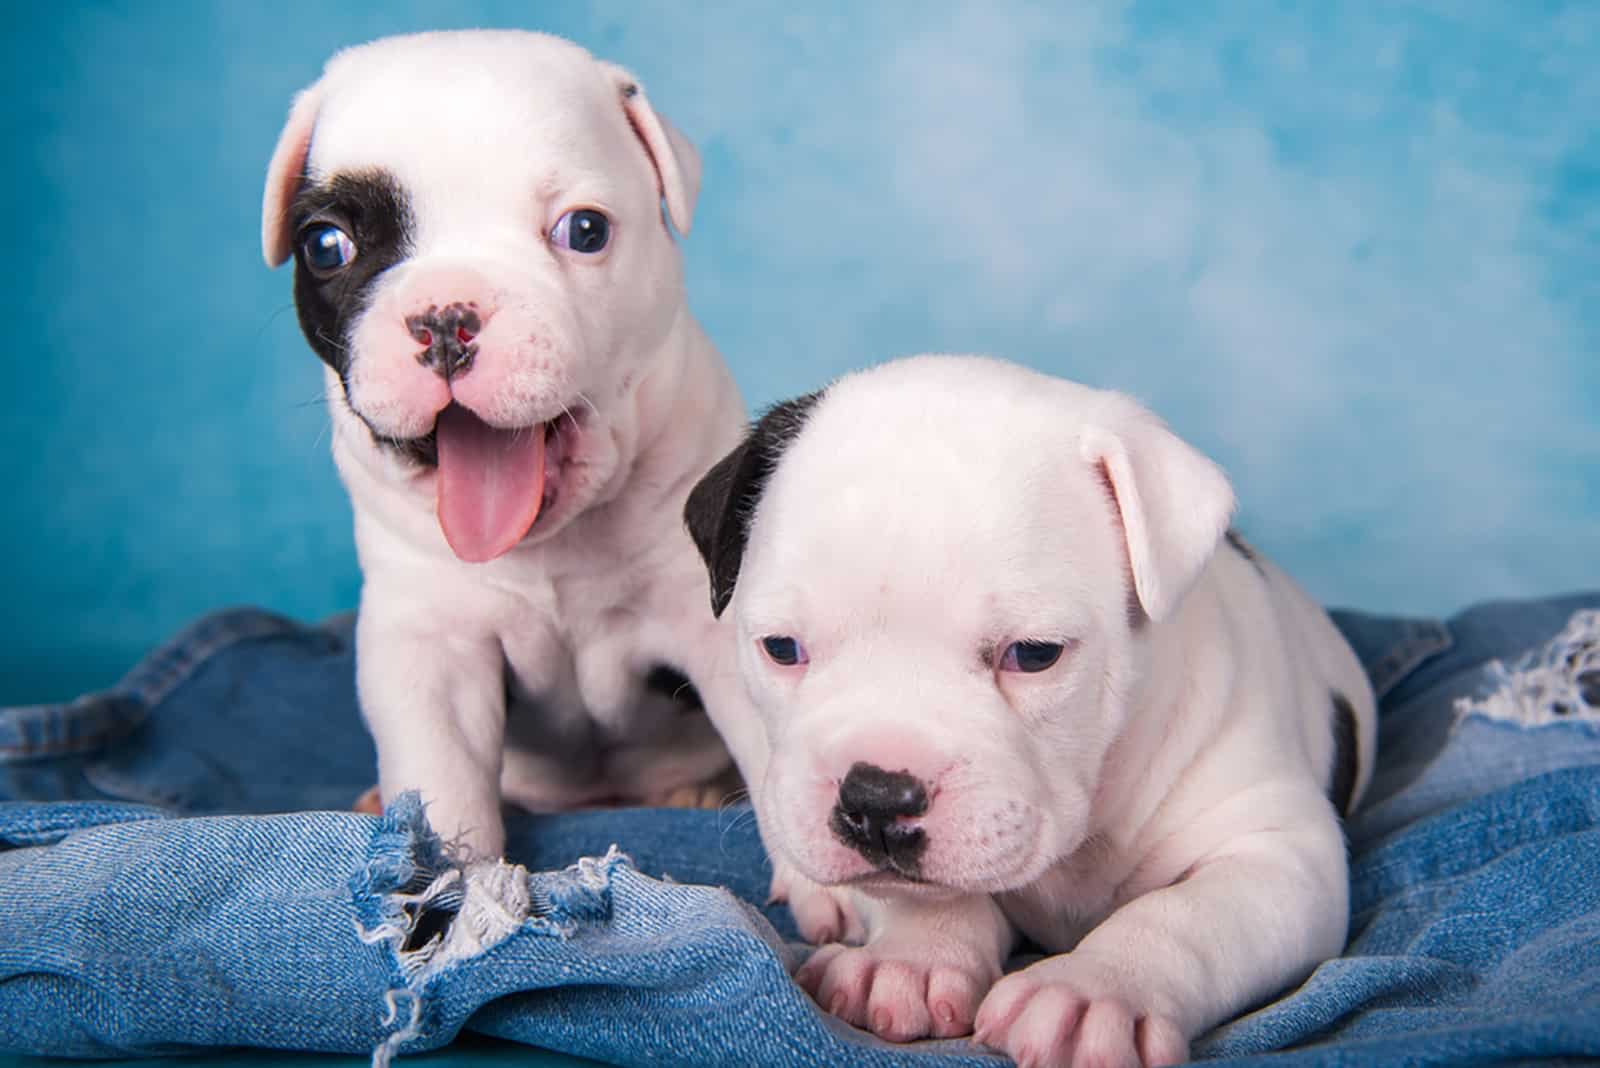 two american pitbull puppies sitting together on a blue jeans